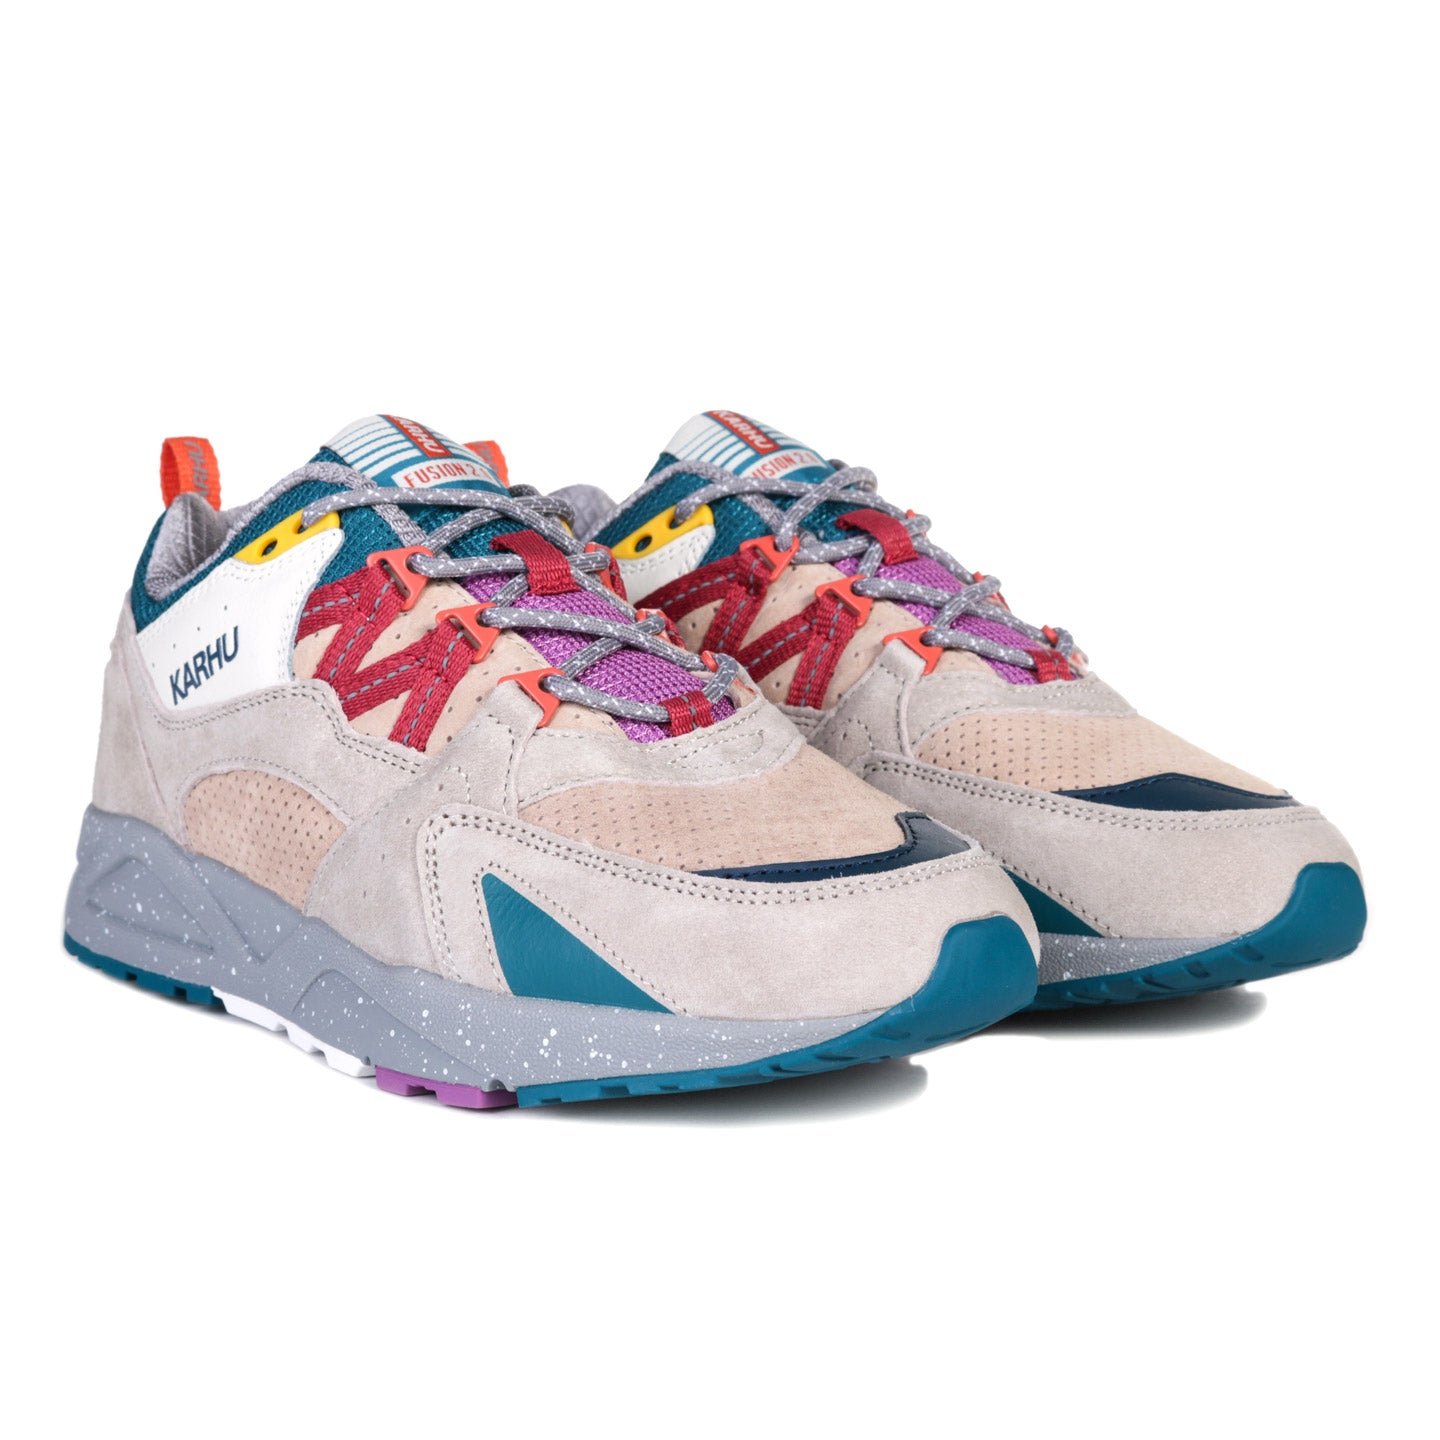 KARHU FUSION 2.0 SILVER LINING / MINERAL RED